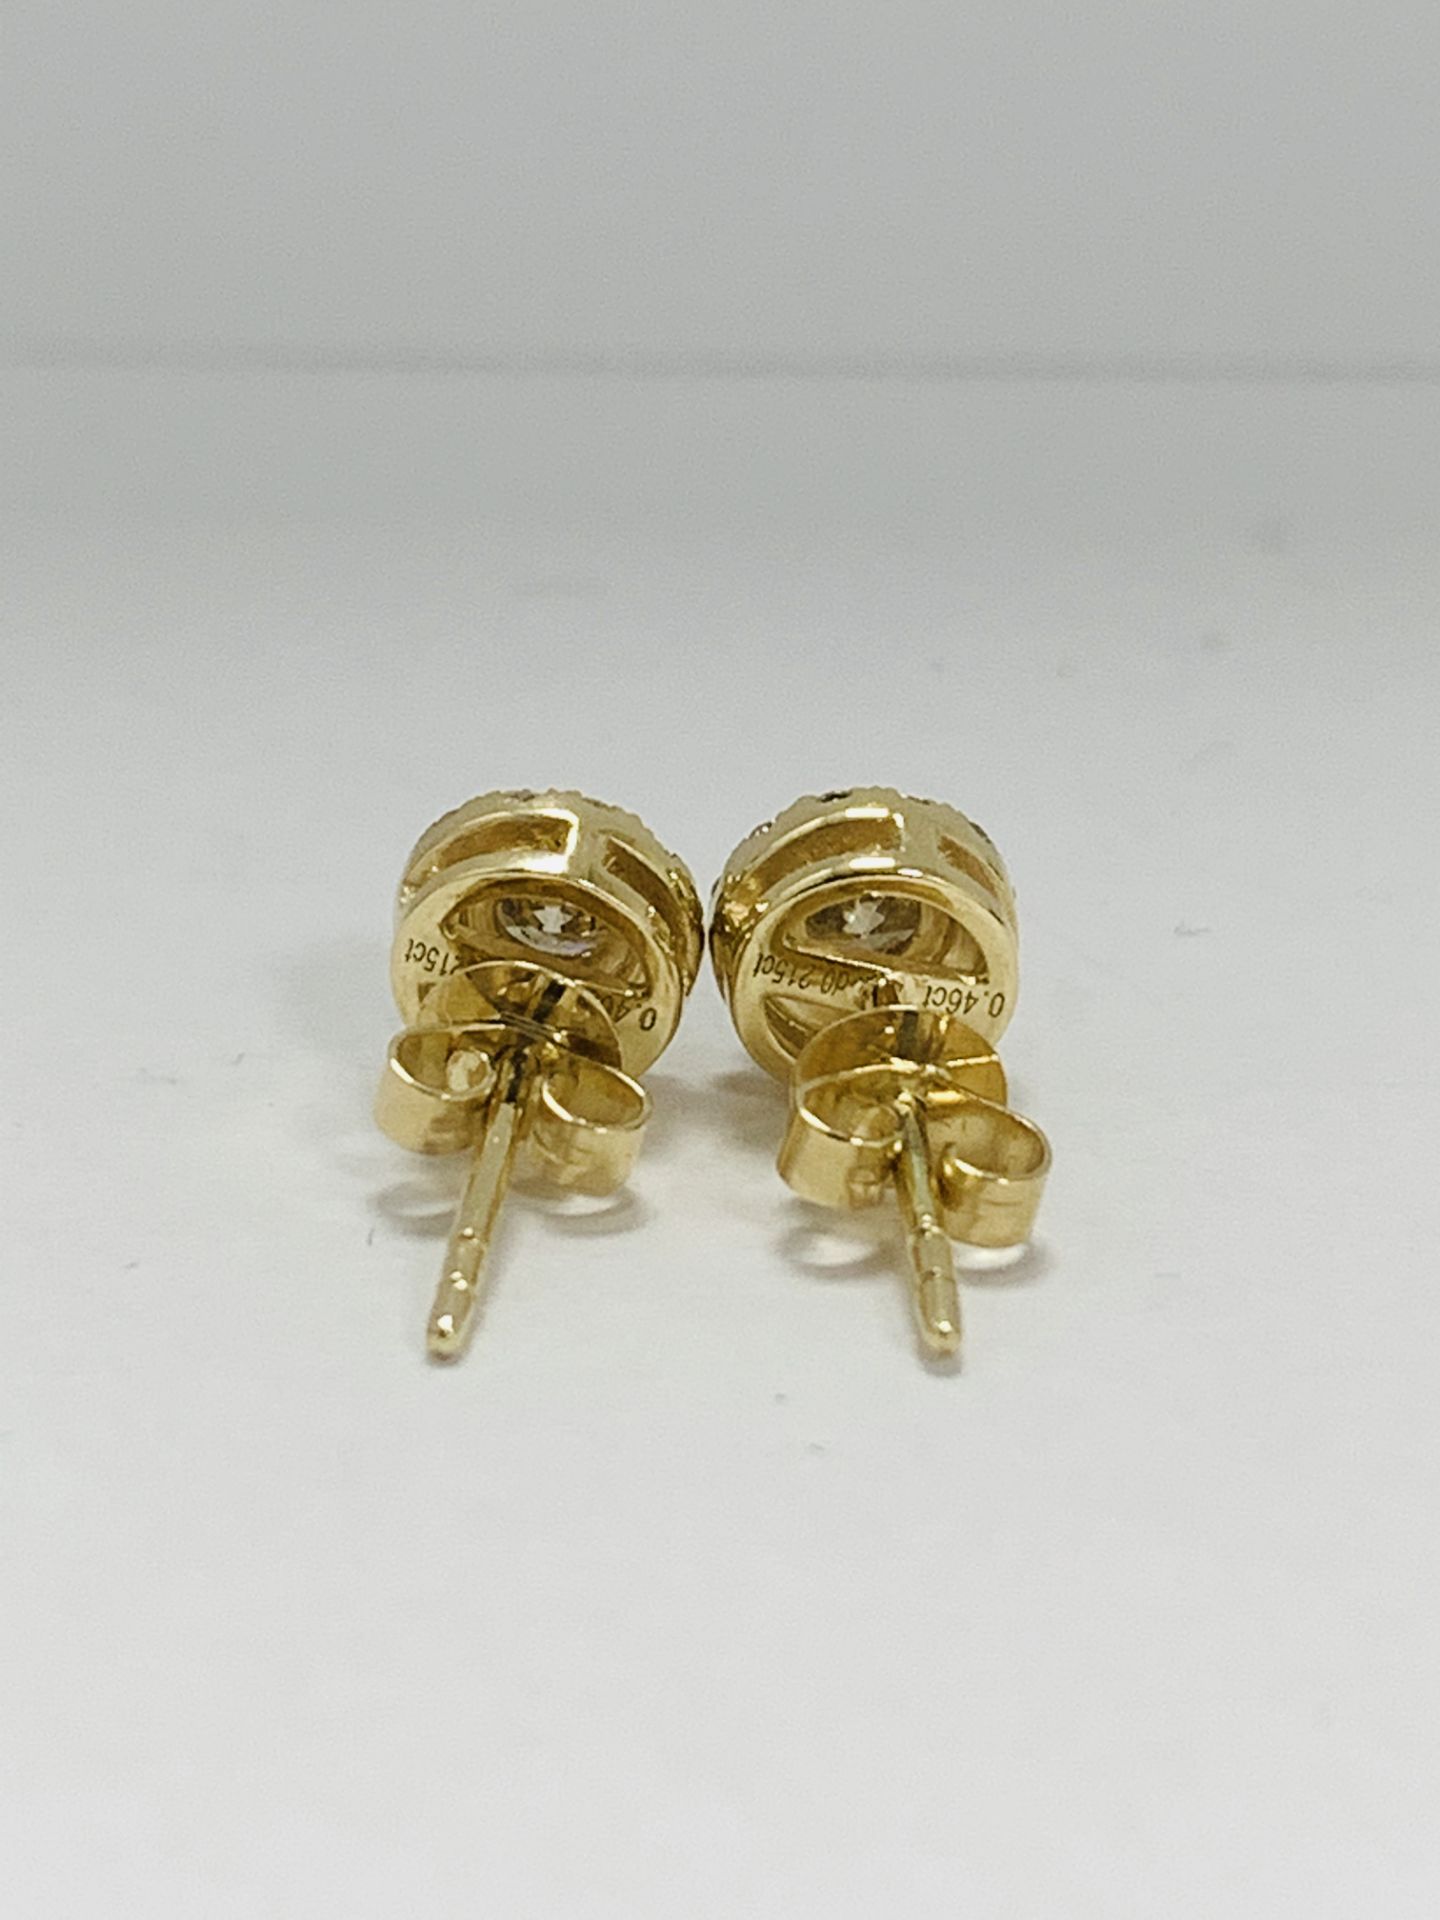 14K Yellow Gold Pair Of Earrings - Image 3 of 6